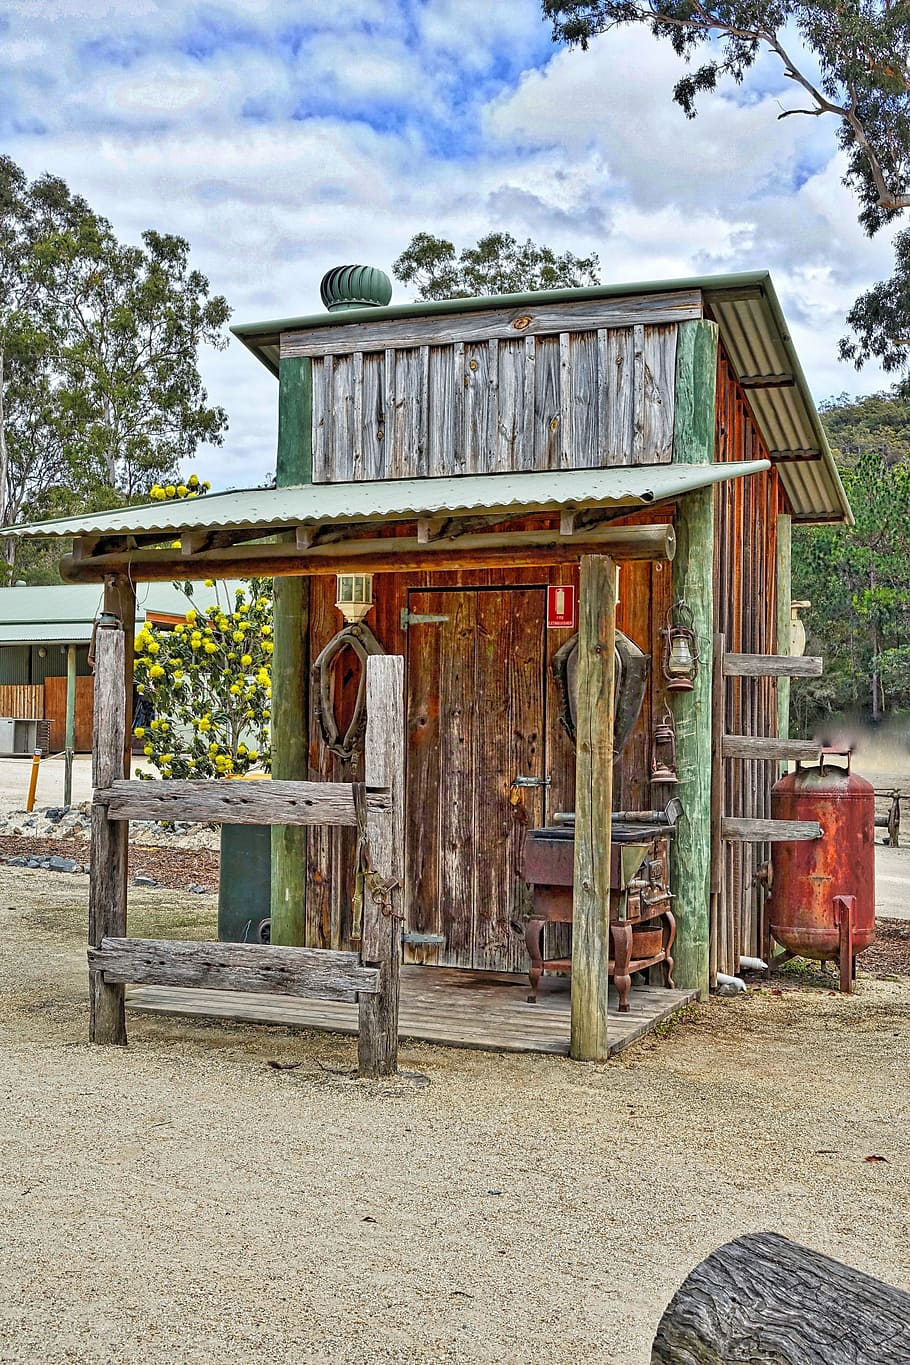 toilet, outhouse, lavatory, outdoor, wooden, building, latrine, architecture, australia, traditional